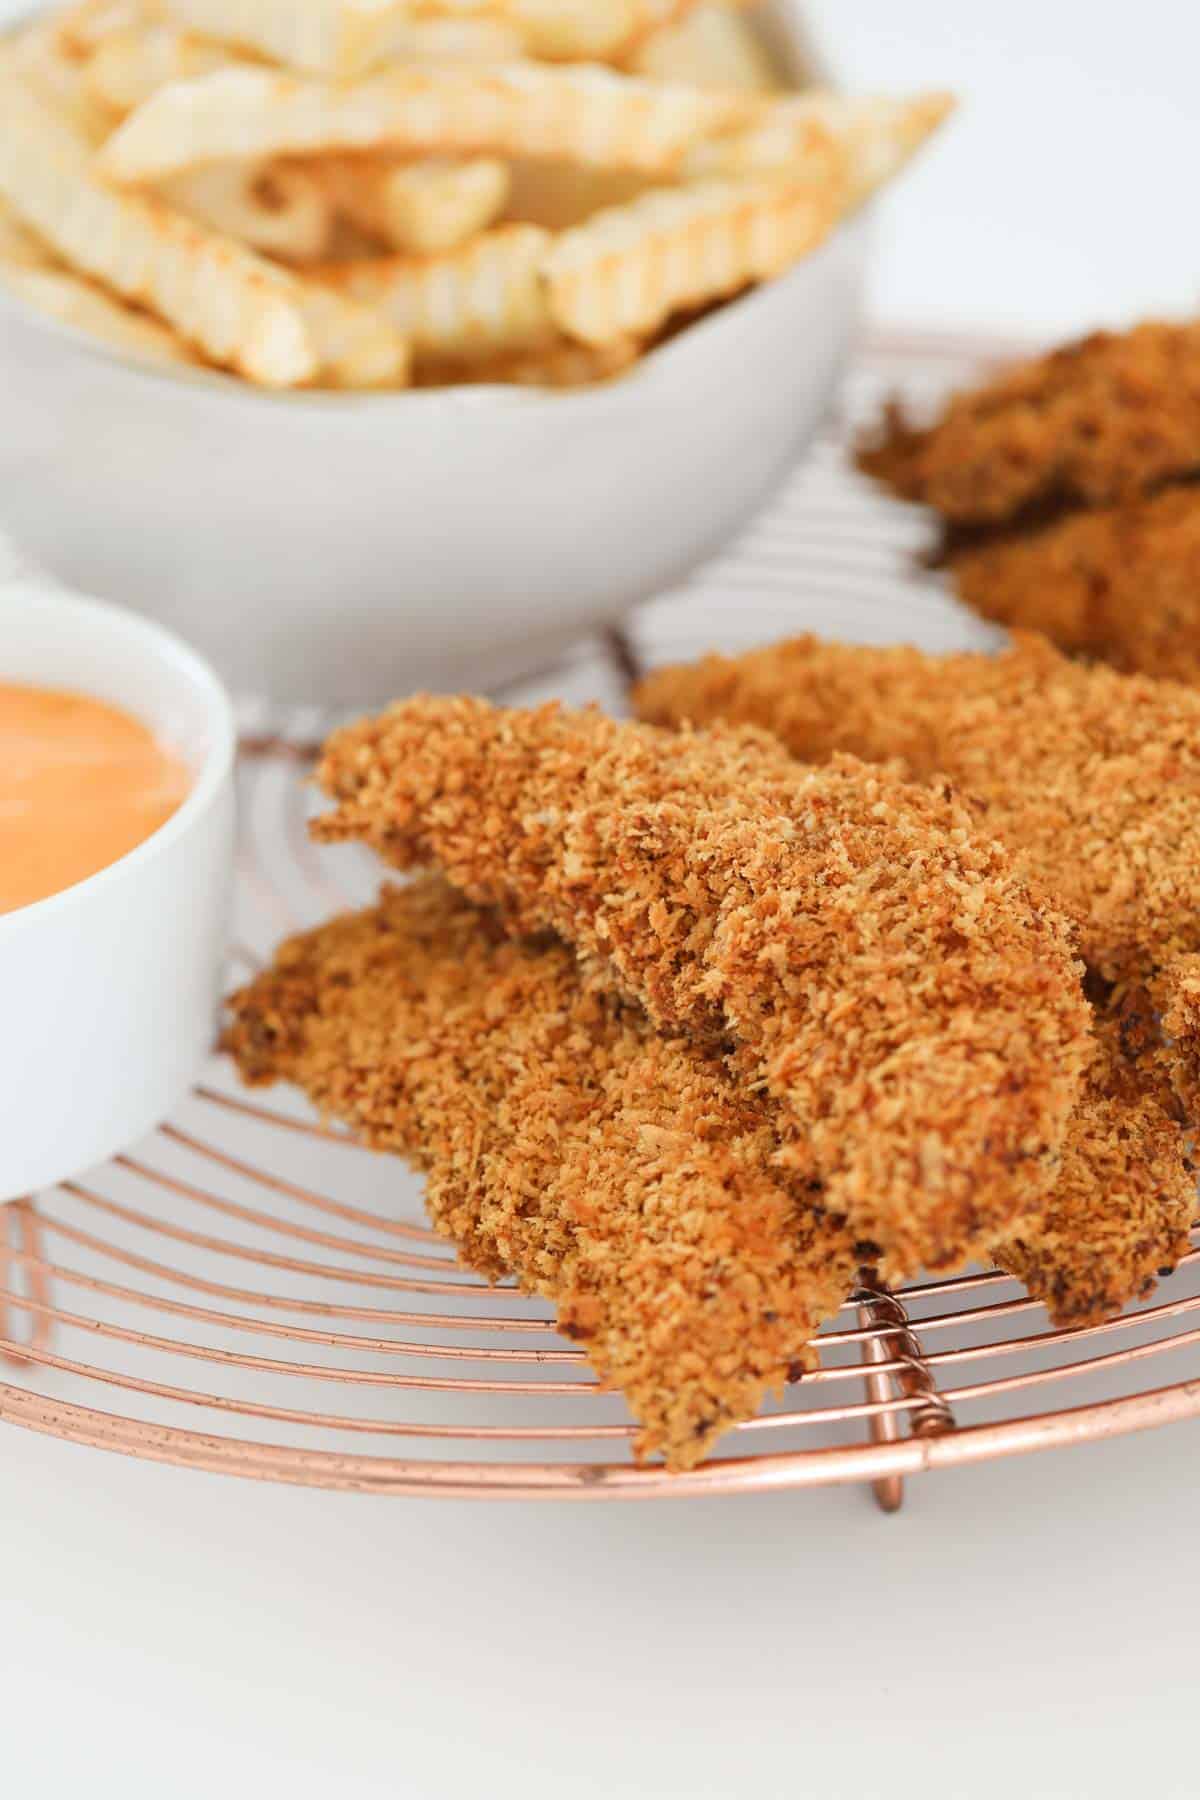 A pile of baked chicken tenderloins on a copper tray with a dipping sauce beside them.